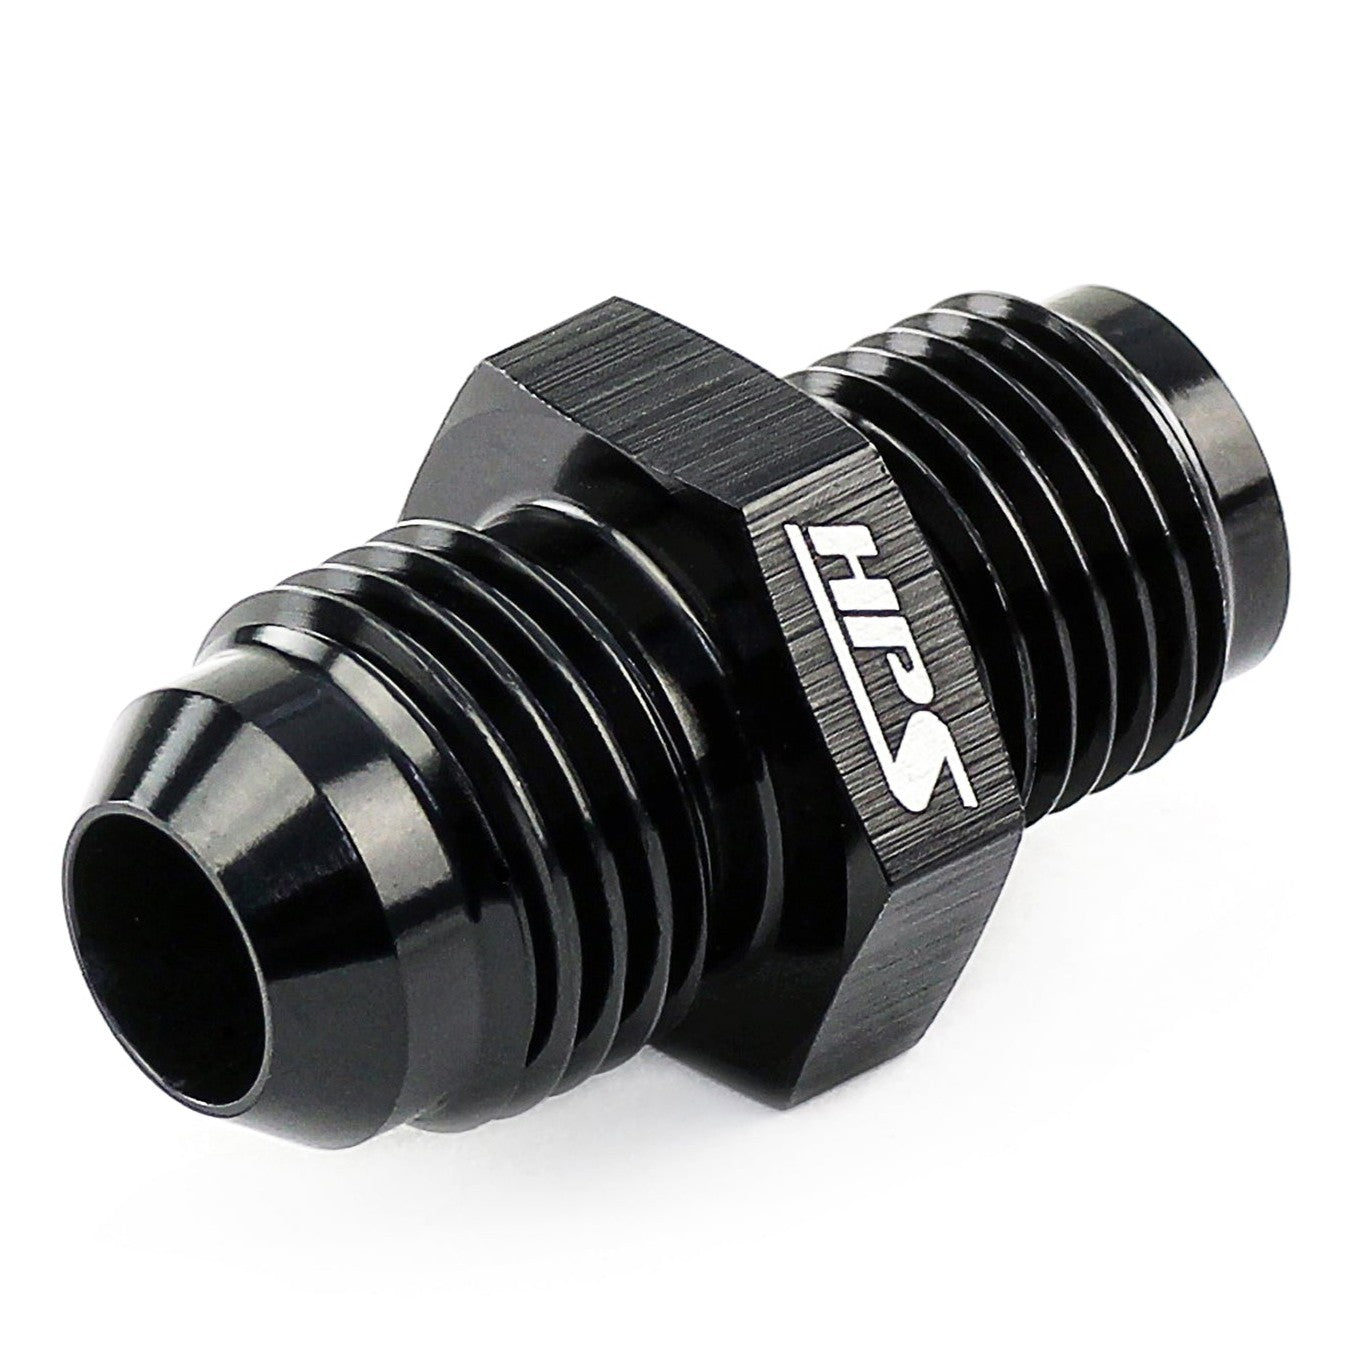 M18 x 1.5 to 3/8 NPT Thread Adapter: Carbon Steel